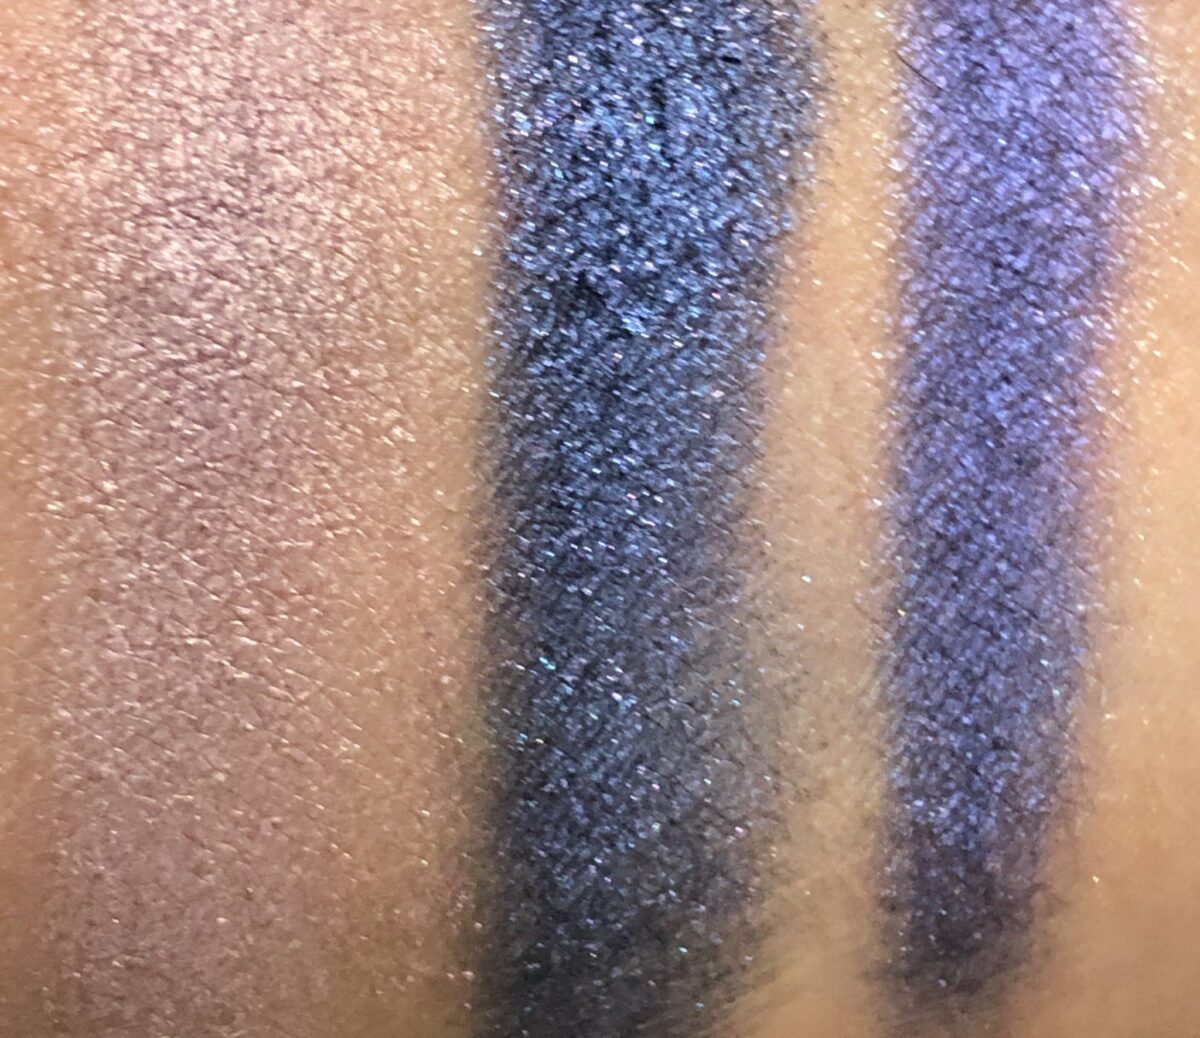 SWATCHES SHOTS, TIPSY, AND CROSS FADED